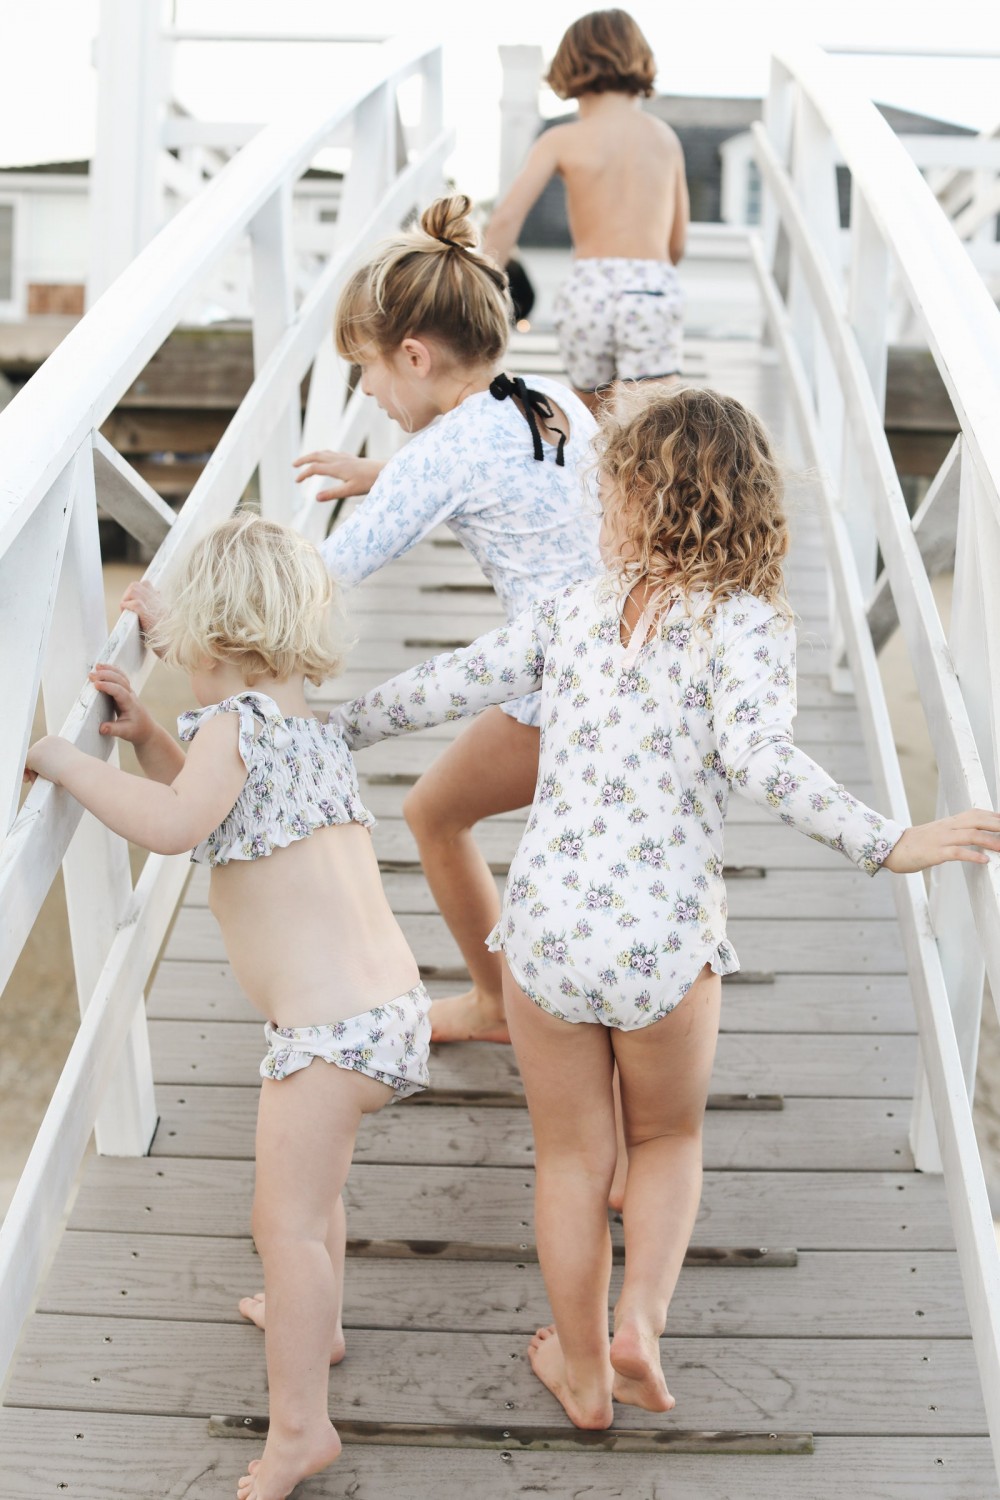 Minnow Swim and Brock Collection Have Created a Whimsical Capsule Collection for Kids